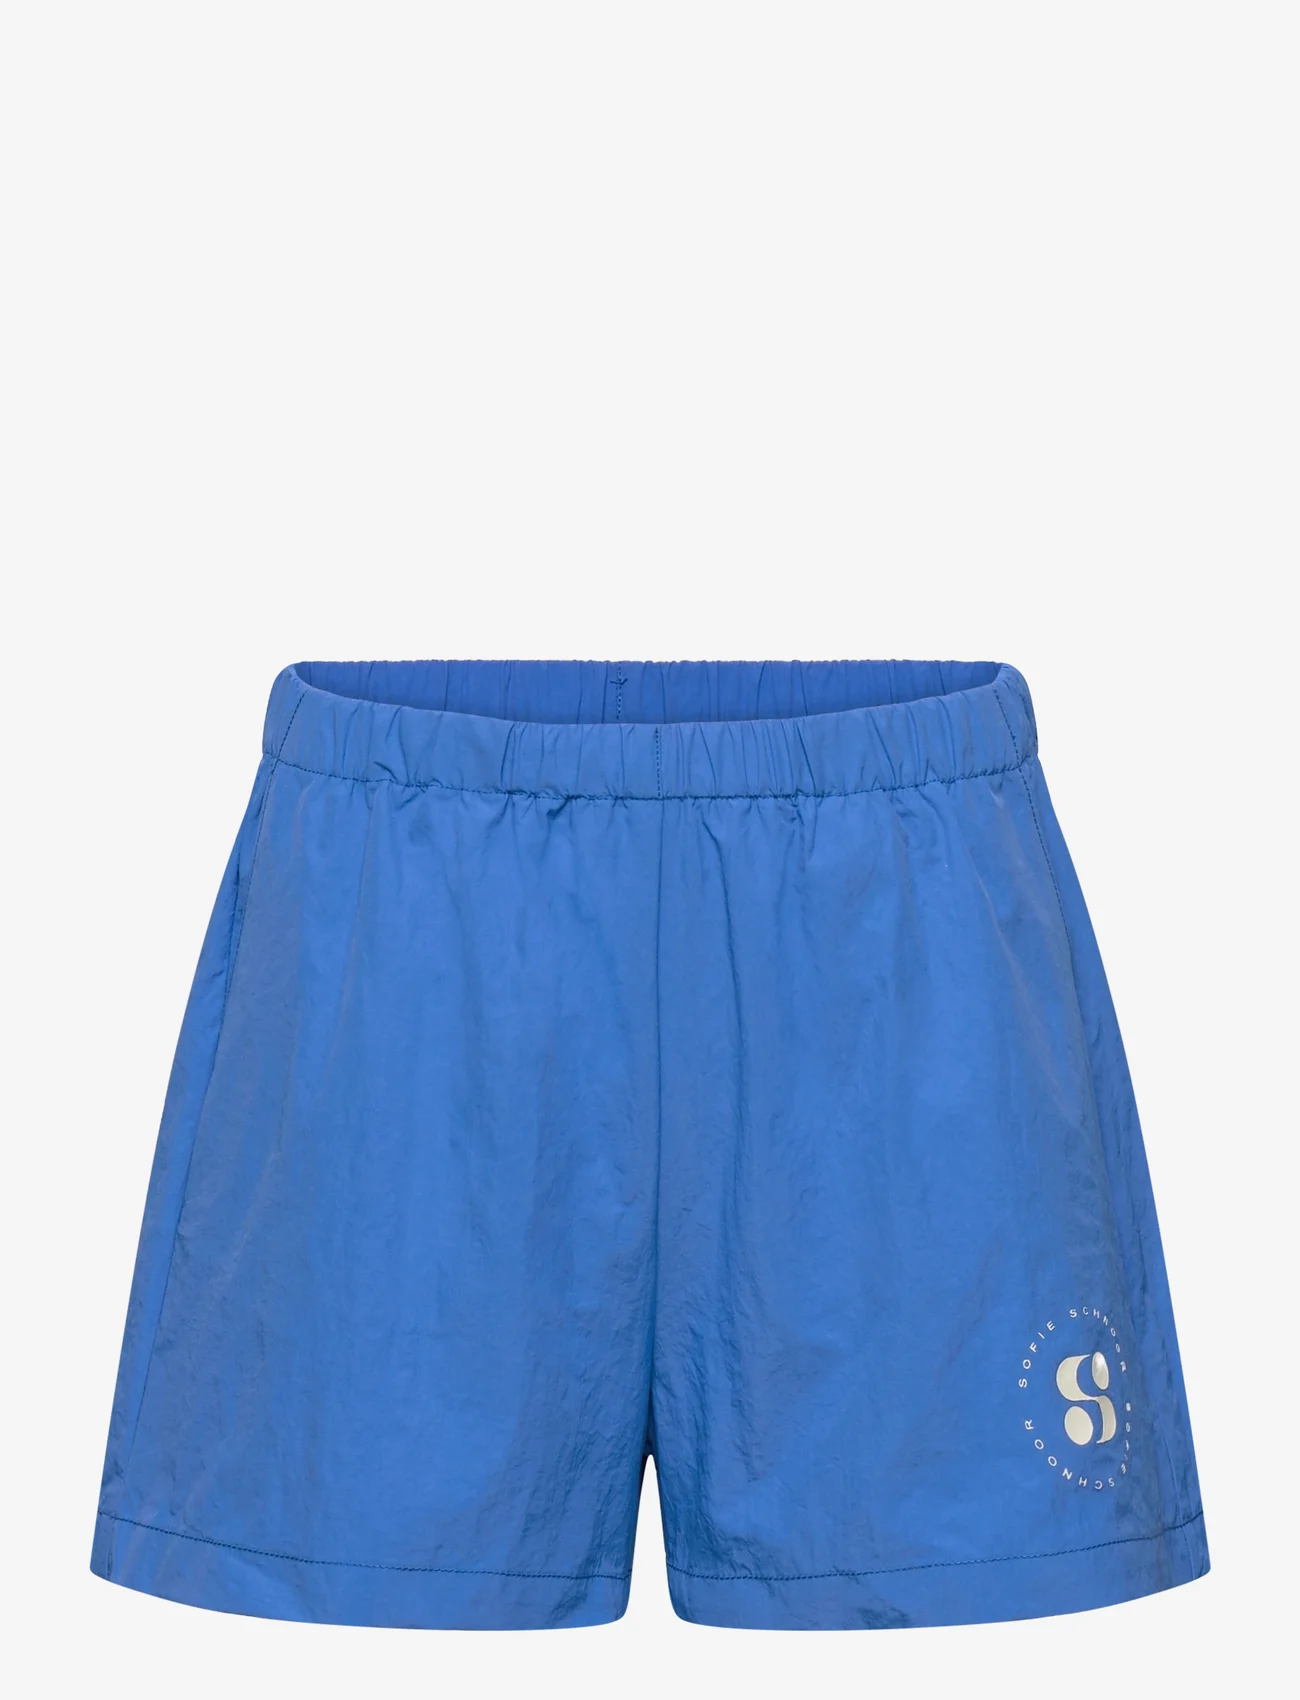 Sofie Schnoor Baby and Kids - Shorts - gode sommertilbud - bright blue - 0